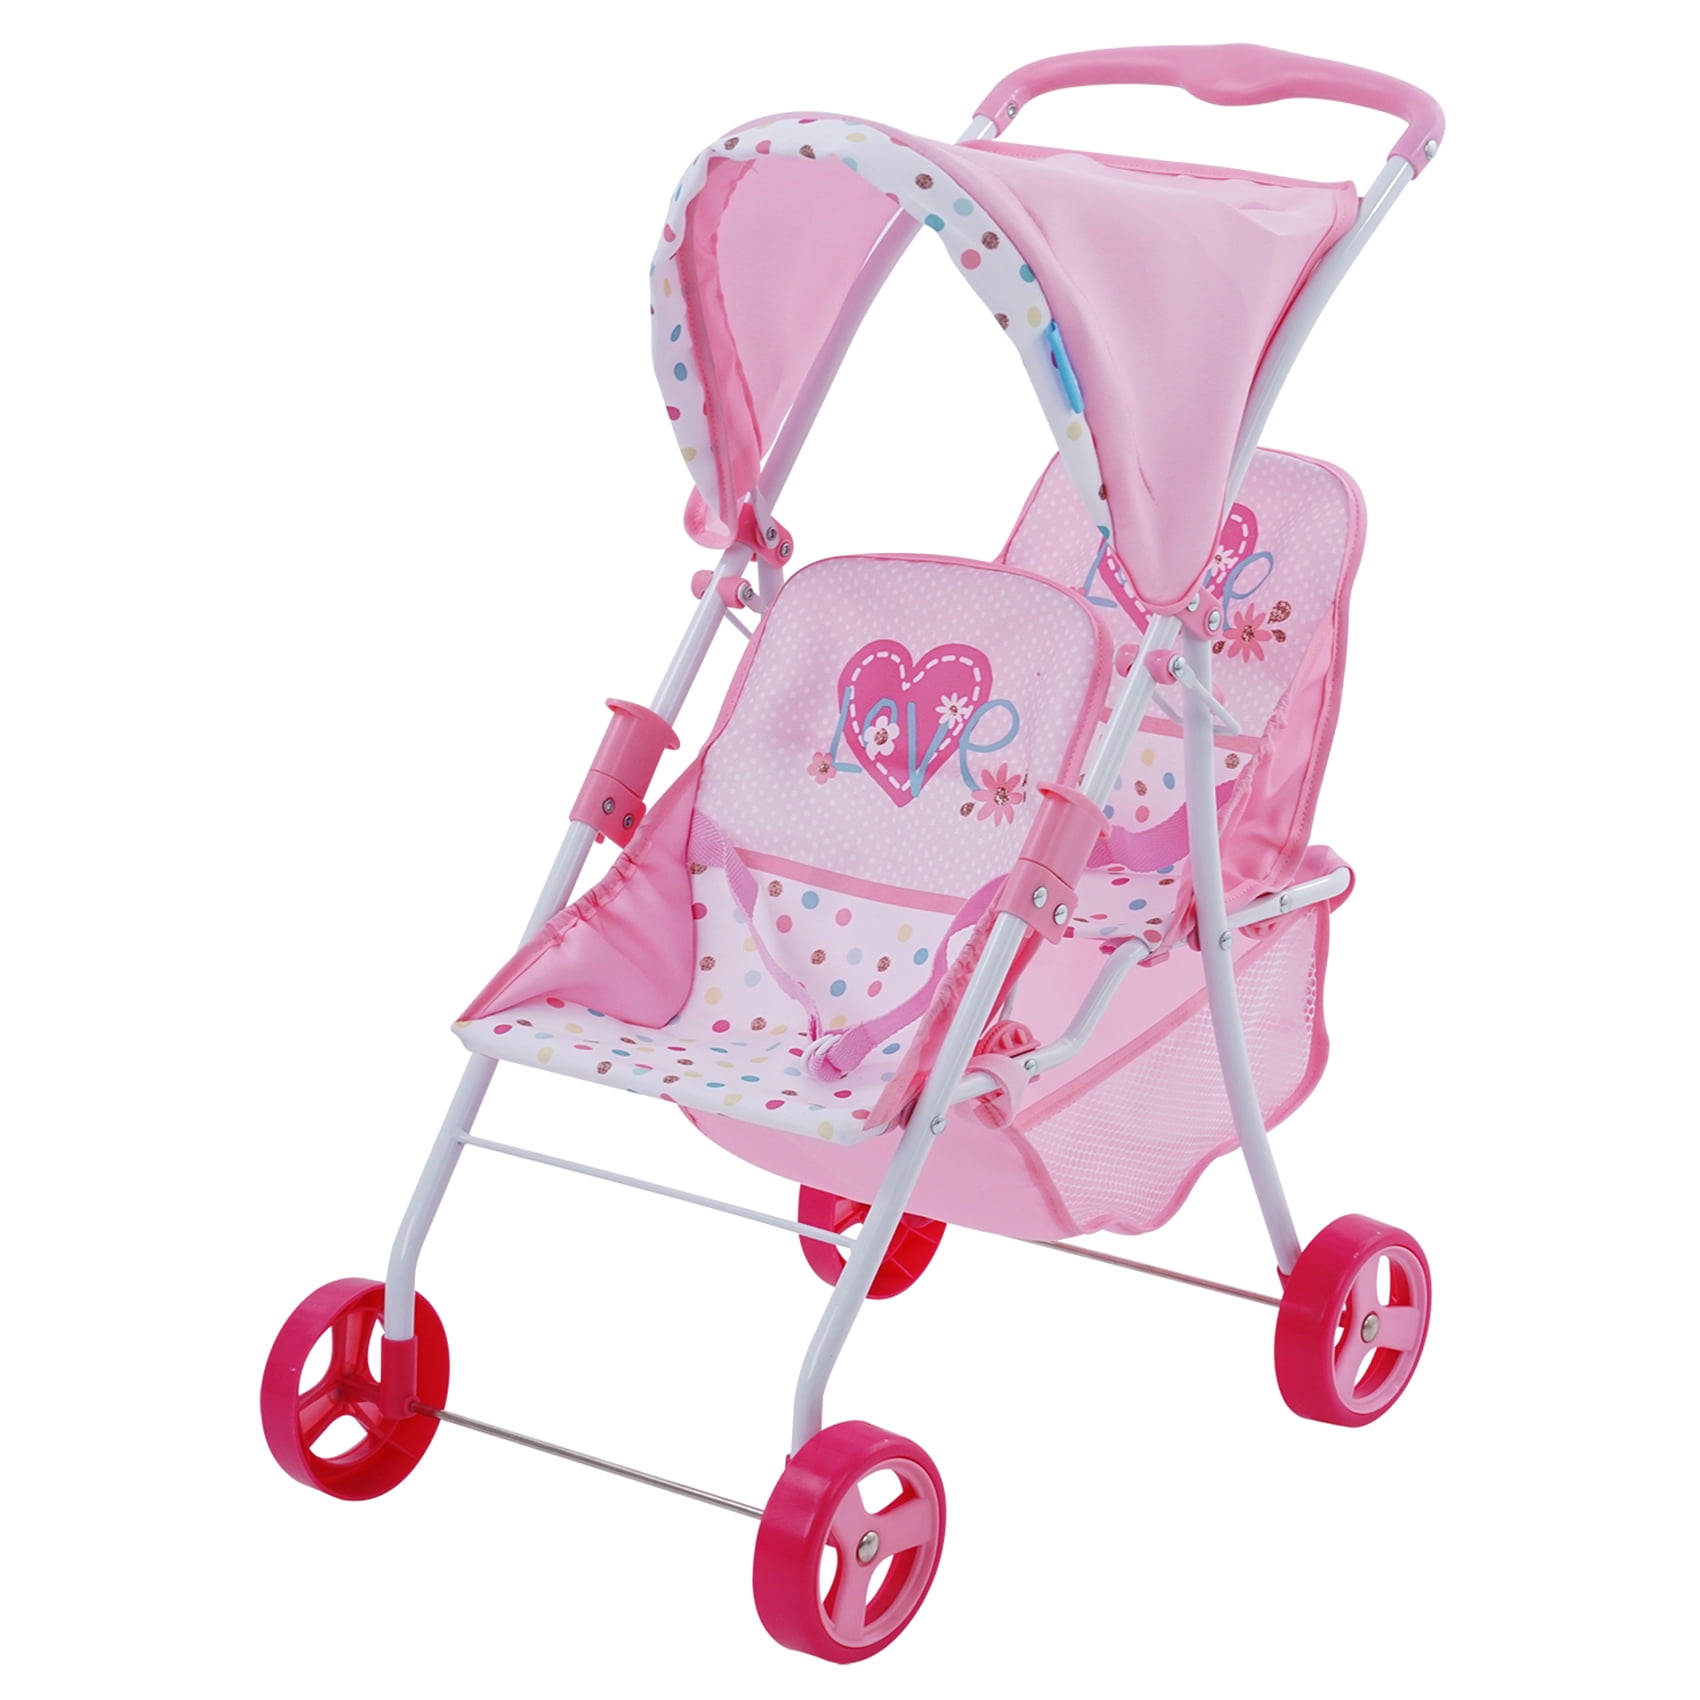 Twin Doll Stroller With Diaper Bag & Swivel Wheels By Exquisite Buggy Foam Grip 